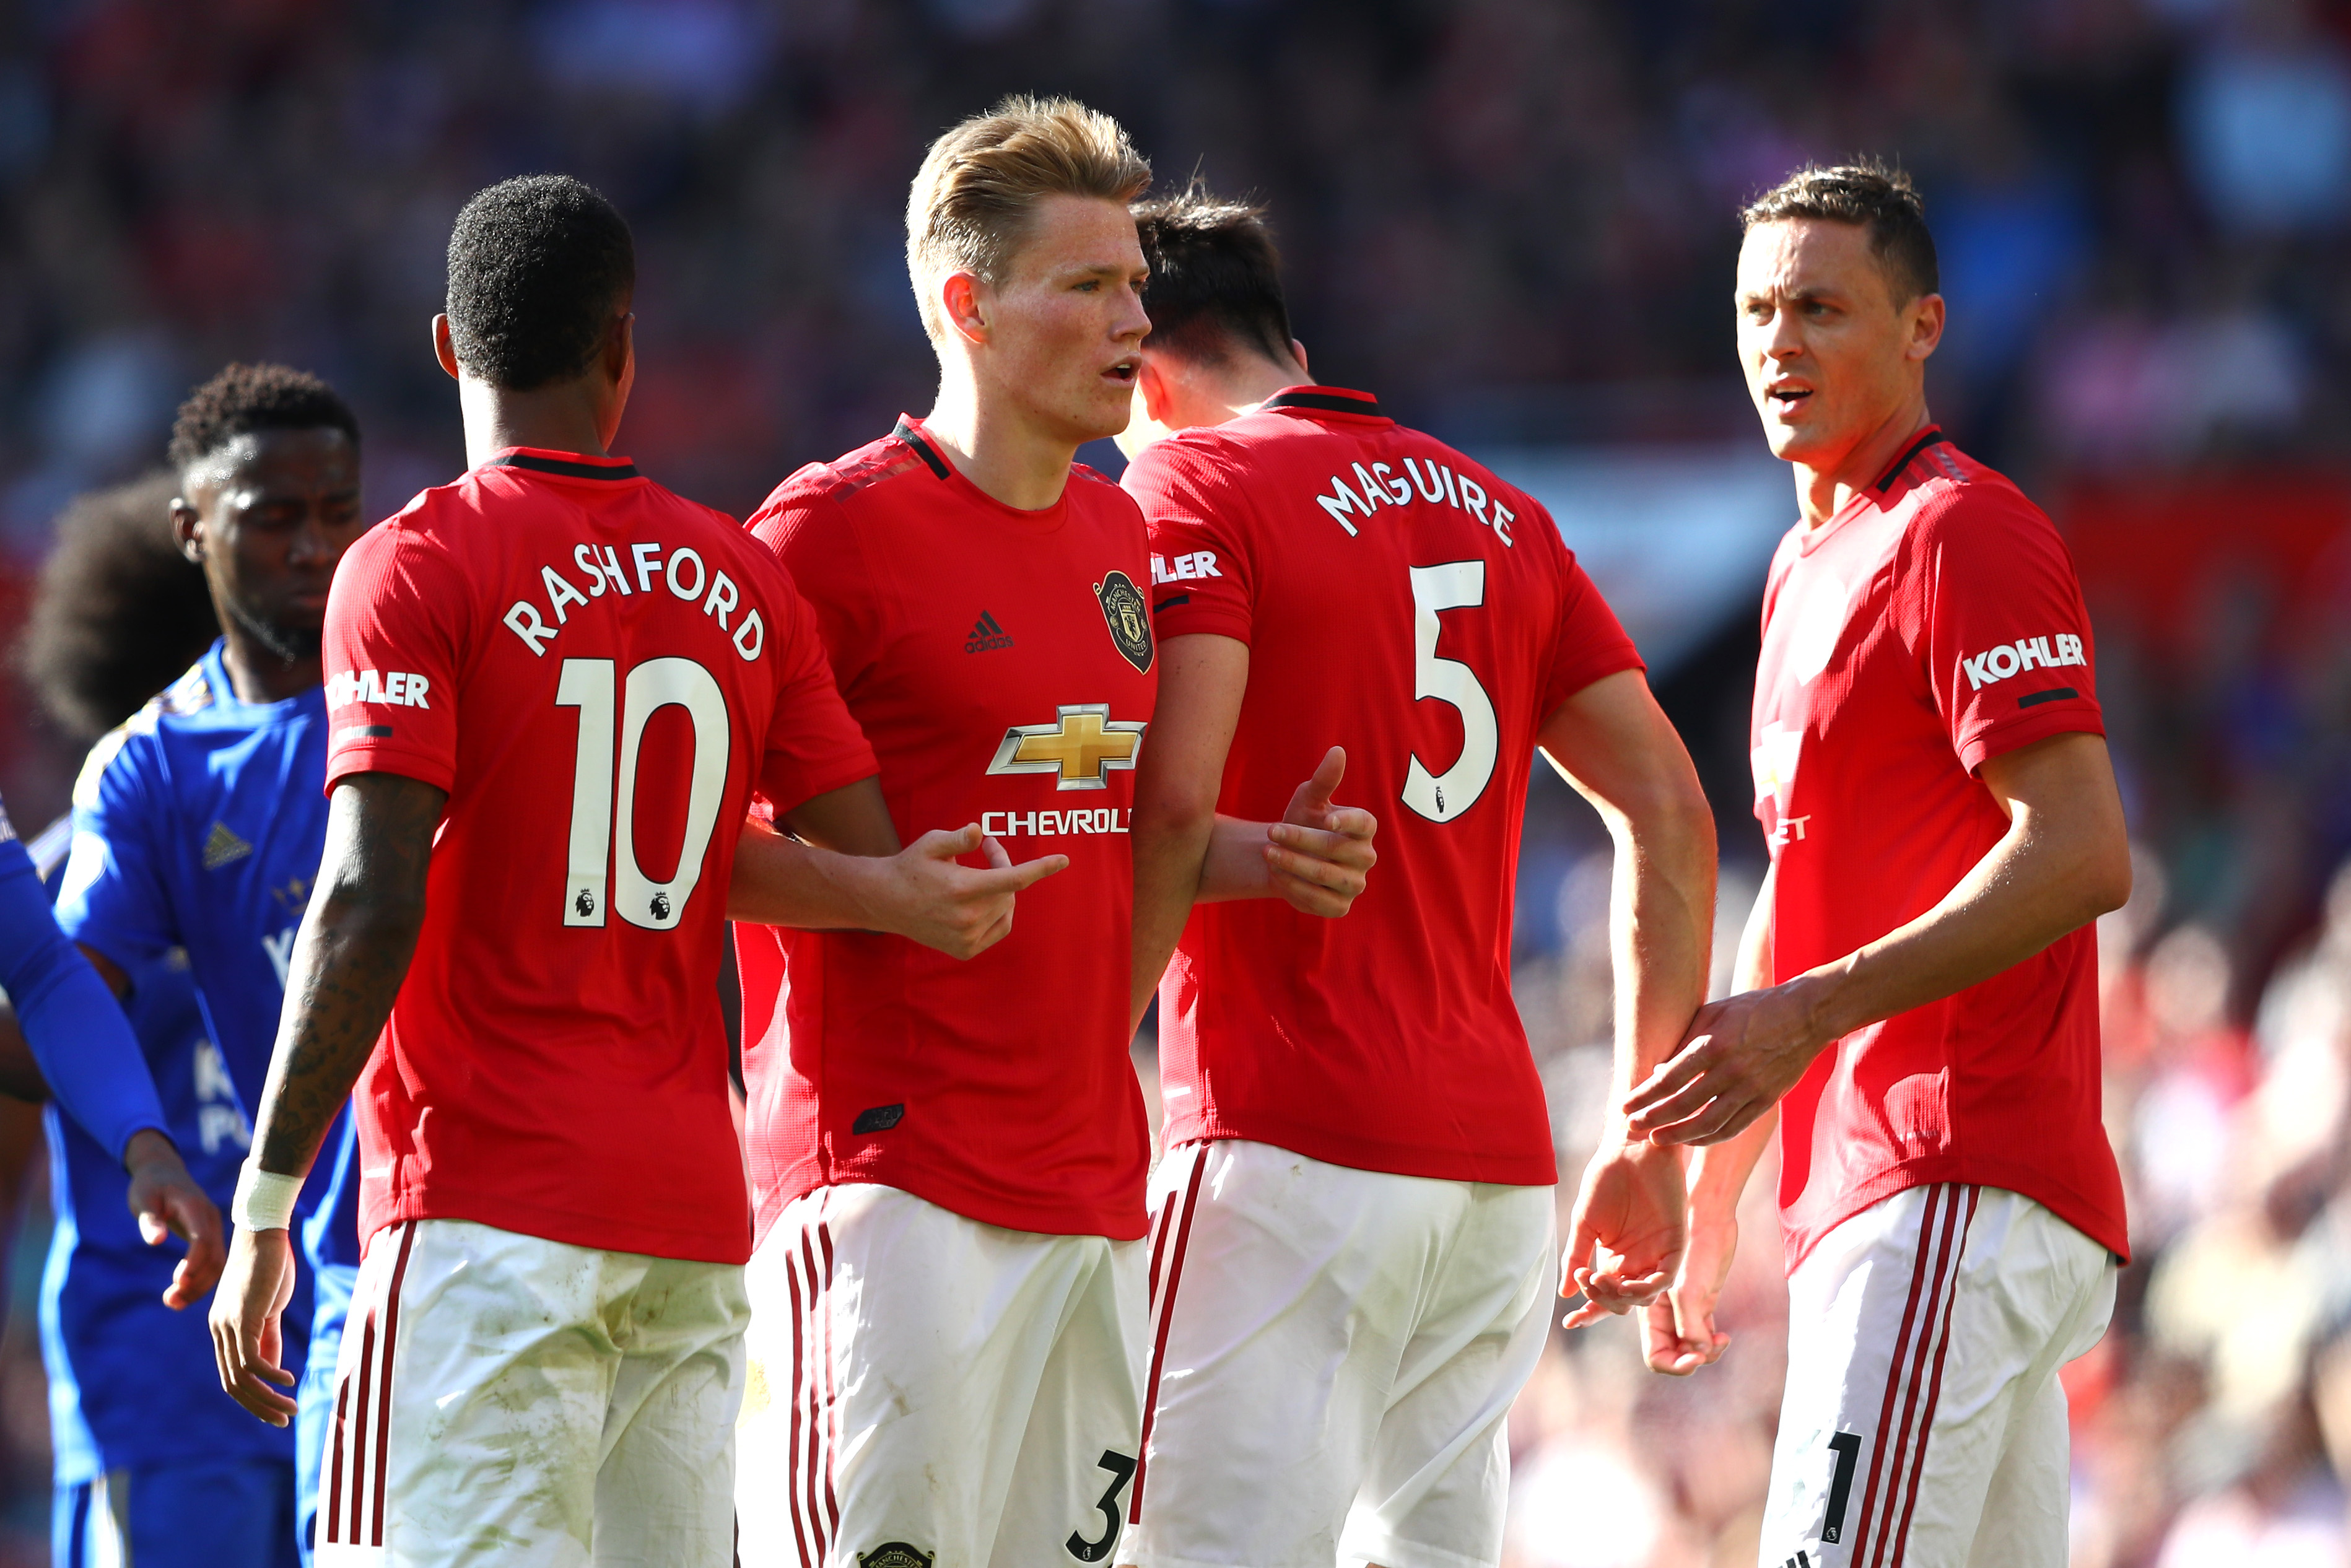 MANCHESTER, ENGLAND - SEPTEMBER 14: Manchester United players form a defensive wall during the Premier League match between Manchester United and Leicester City at Old Trafford on September 14, 2019 in Manchester, United Kingdom. (Photo by Mark Thompson/Getty Images)